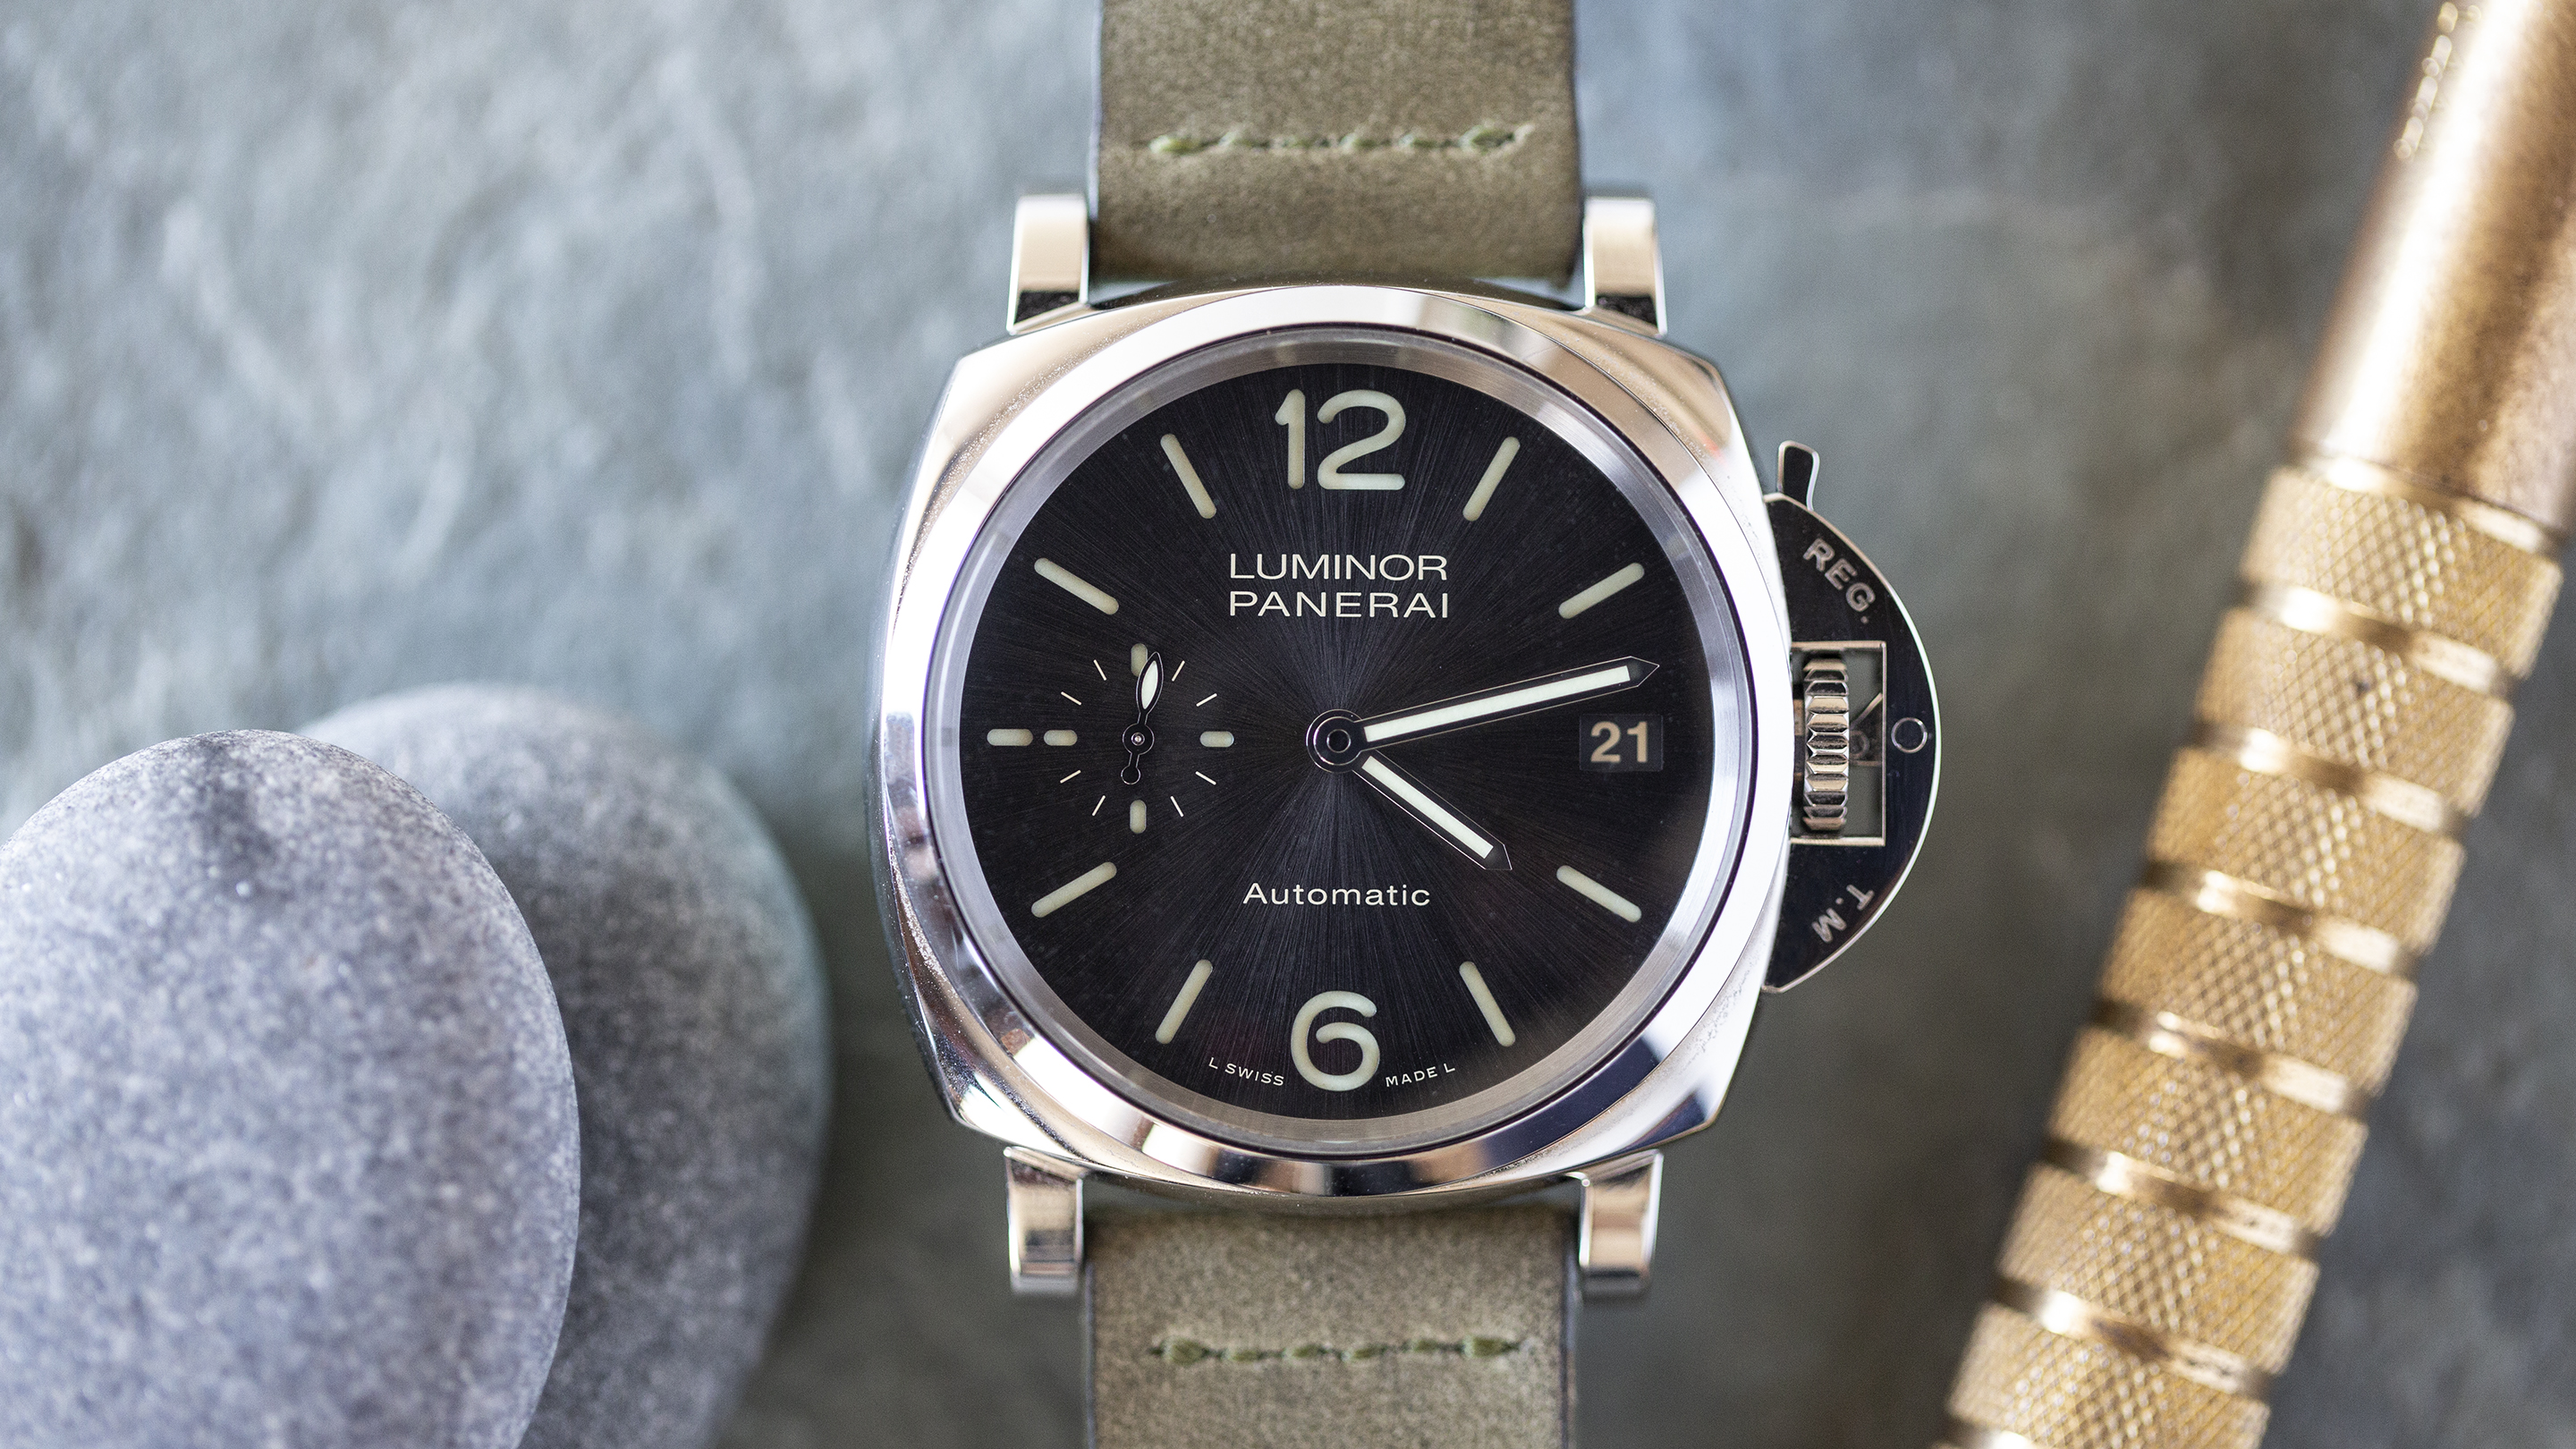 Panerai 1028 Luminor Marina Automatic Blue Dial WARRANTY... for Rs.595,870  for sale from a Trusted Seller on Chrono24